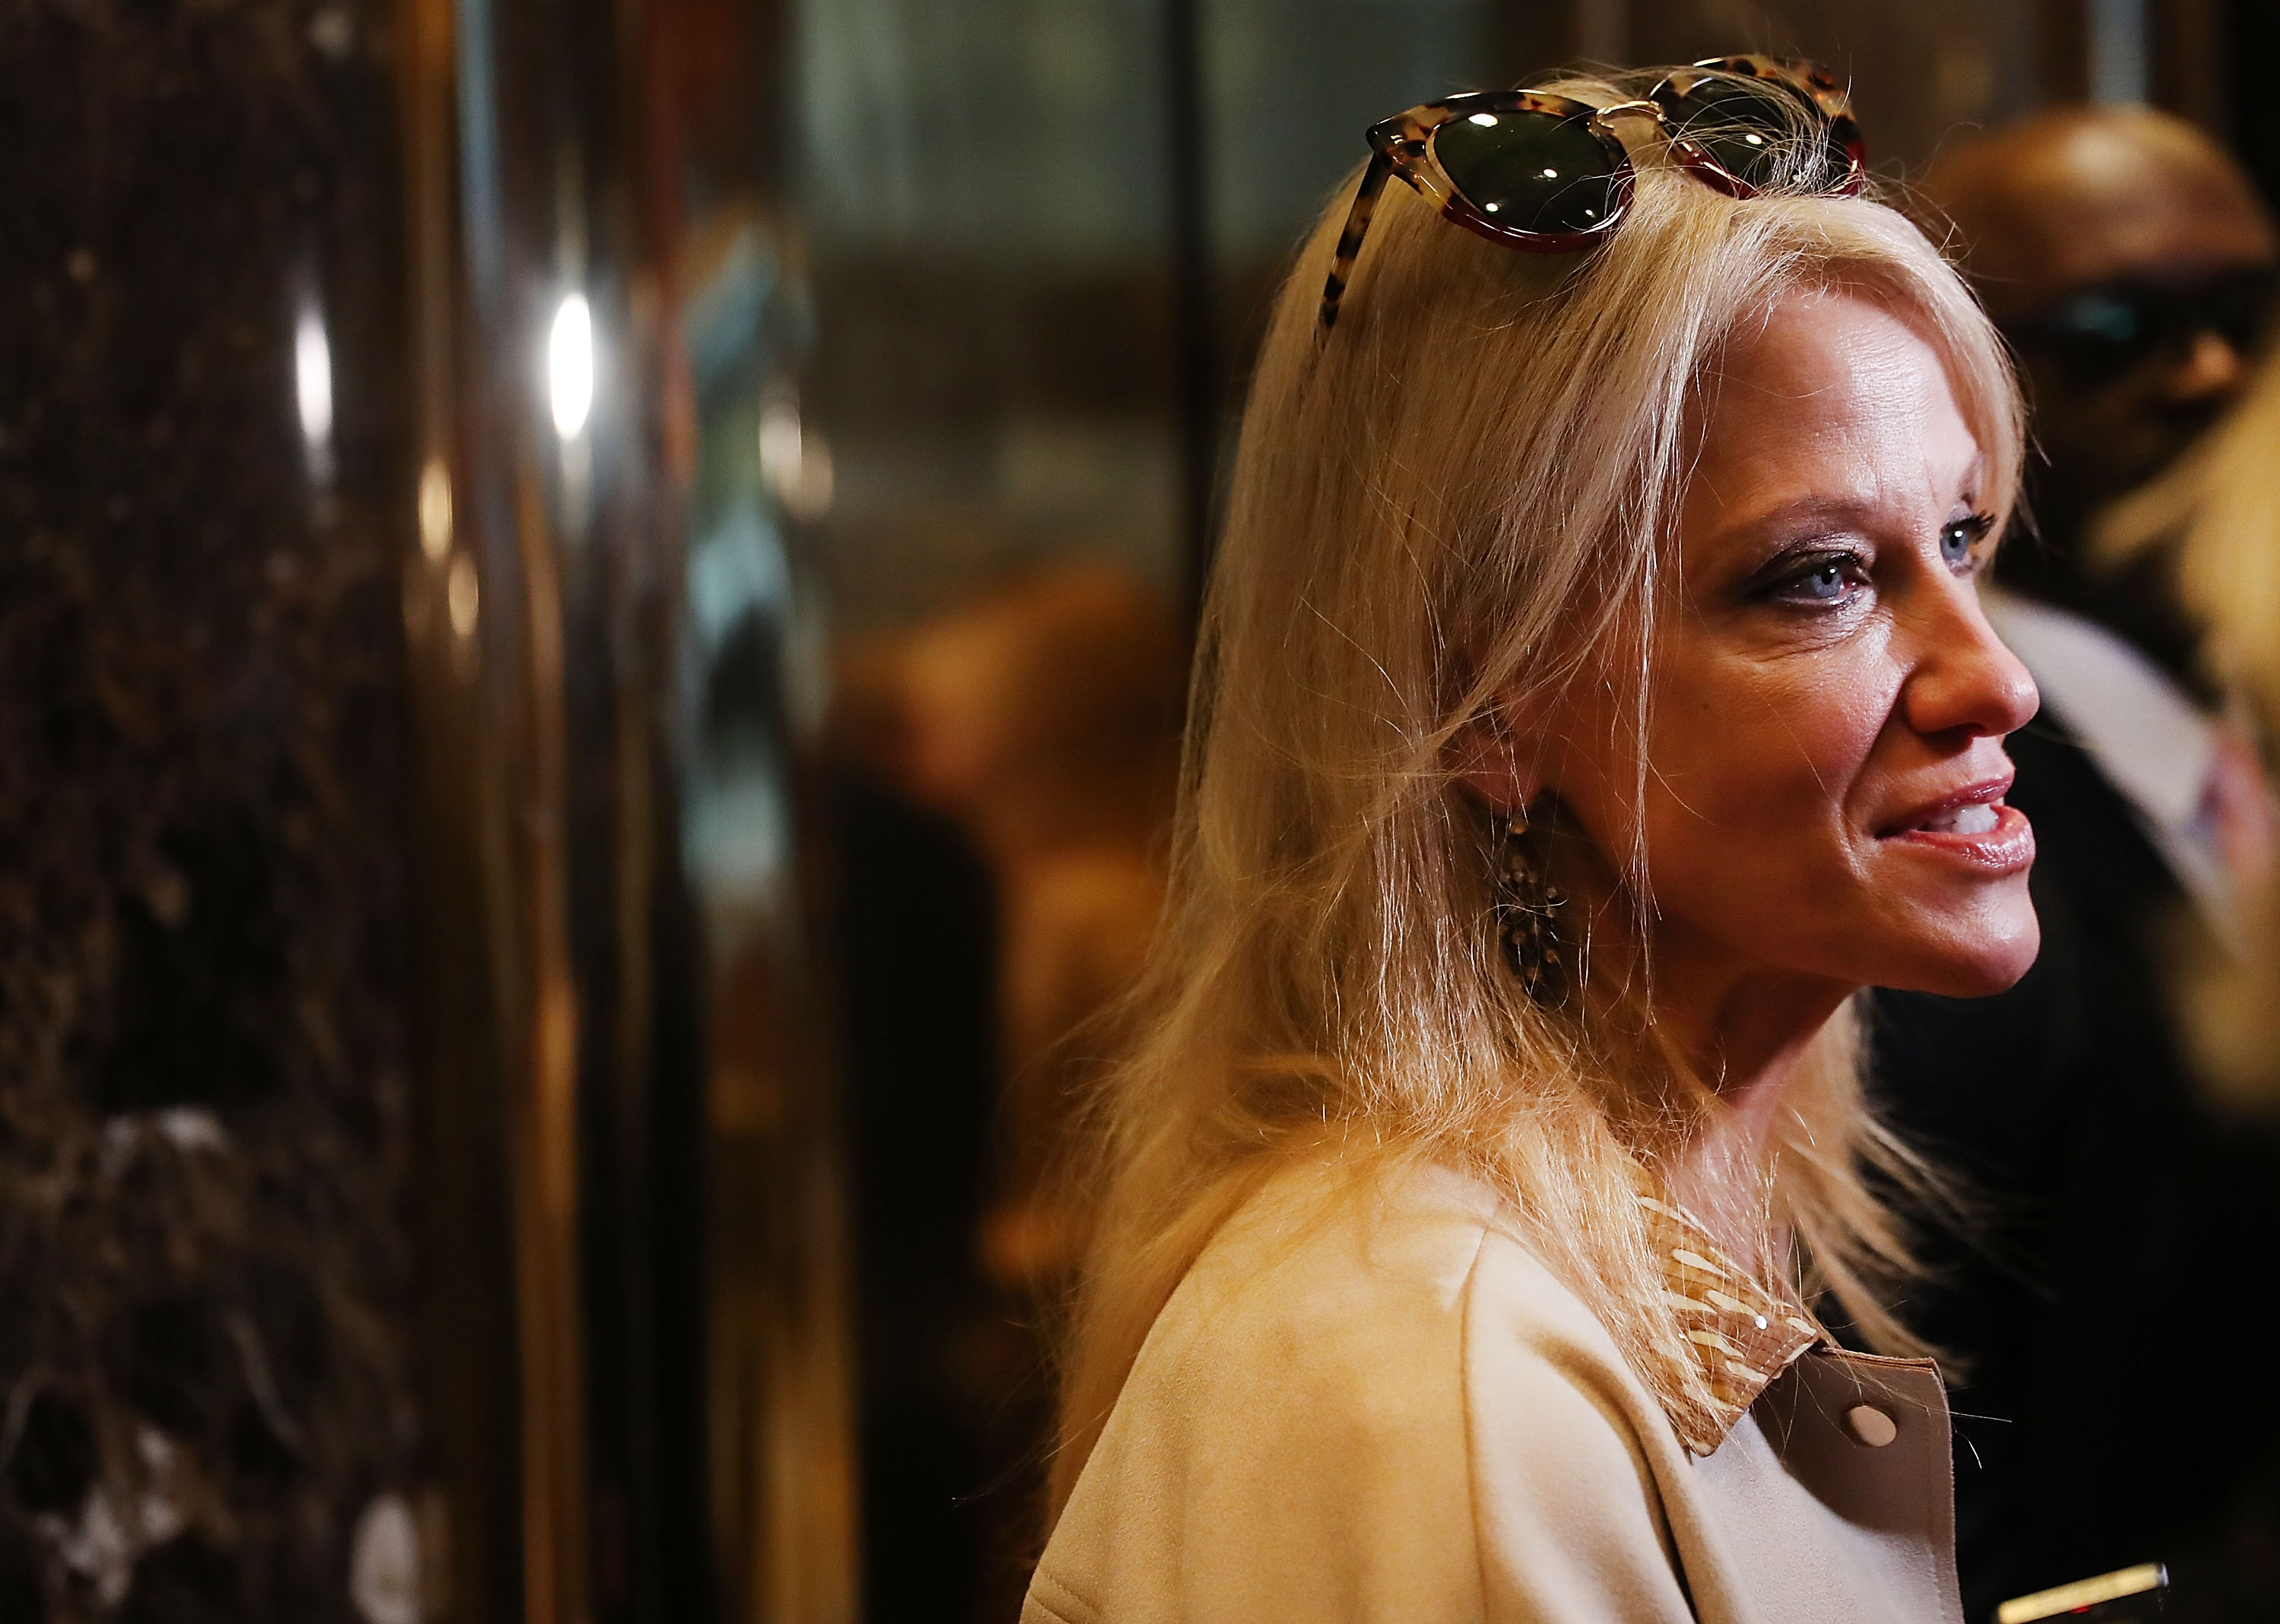 Donald Trump's campaign manager Kellyanne Conway speaks to the media while entering Trump Tower on Nov. 14, 2016 in New York City. (Spencer Platt/Getty Images)